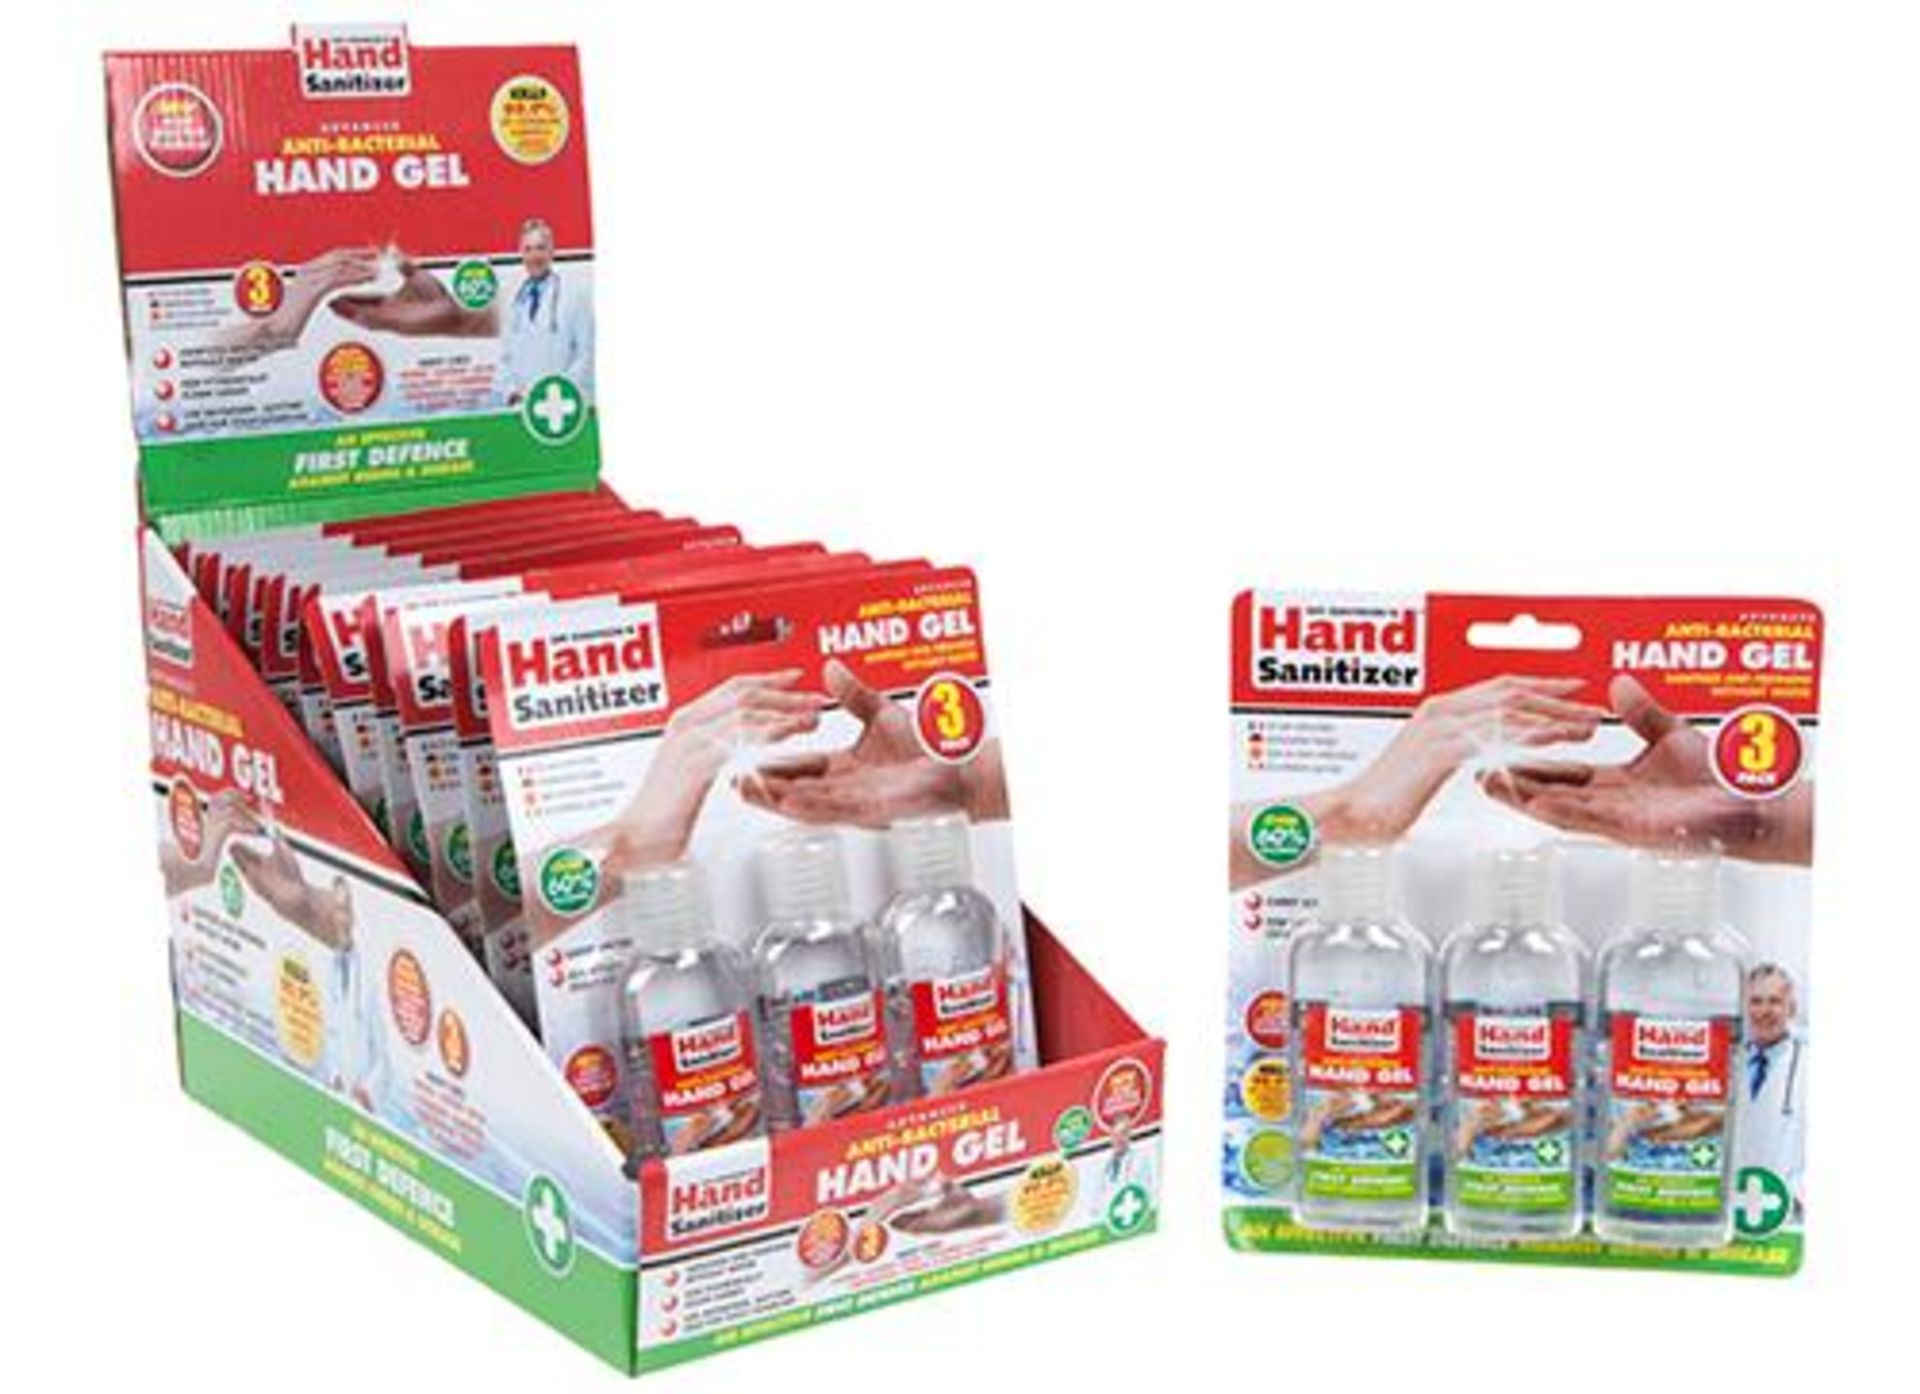 V *TRADE QTY* Brand New 3 Bottles of Antibacterial Hand Sanitiser X 4 YOUR BID PRICE TO BE